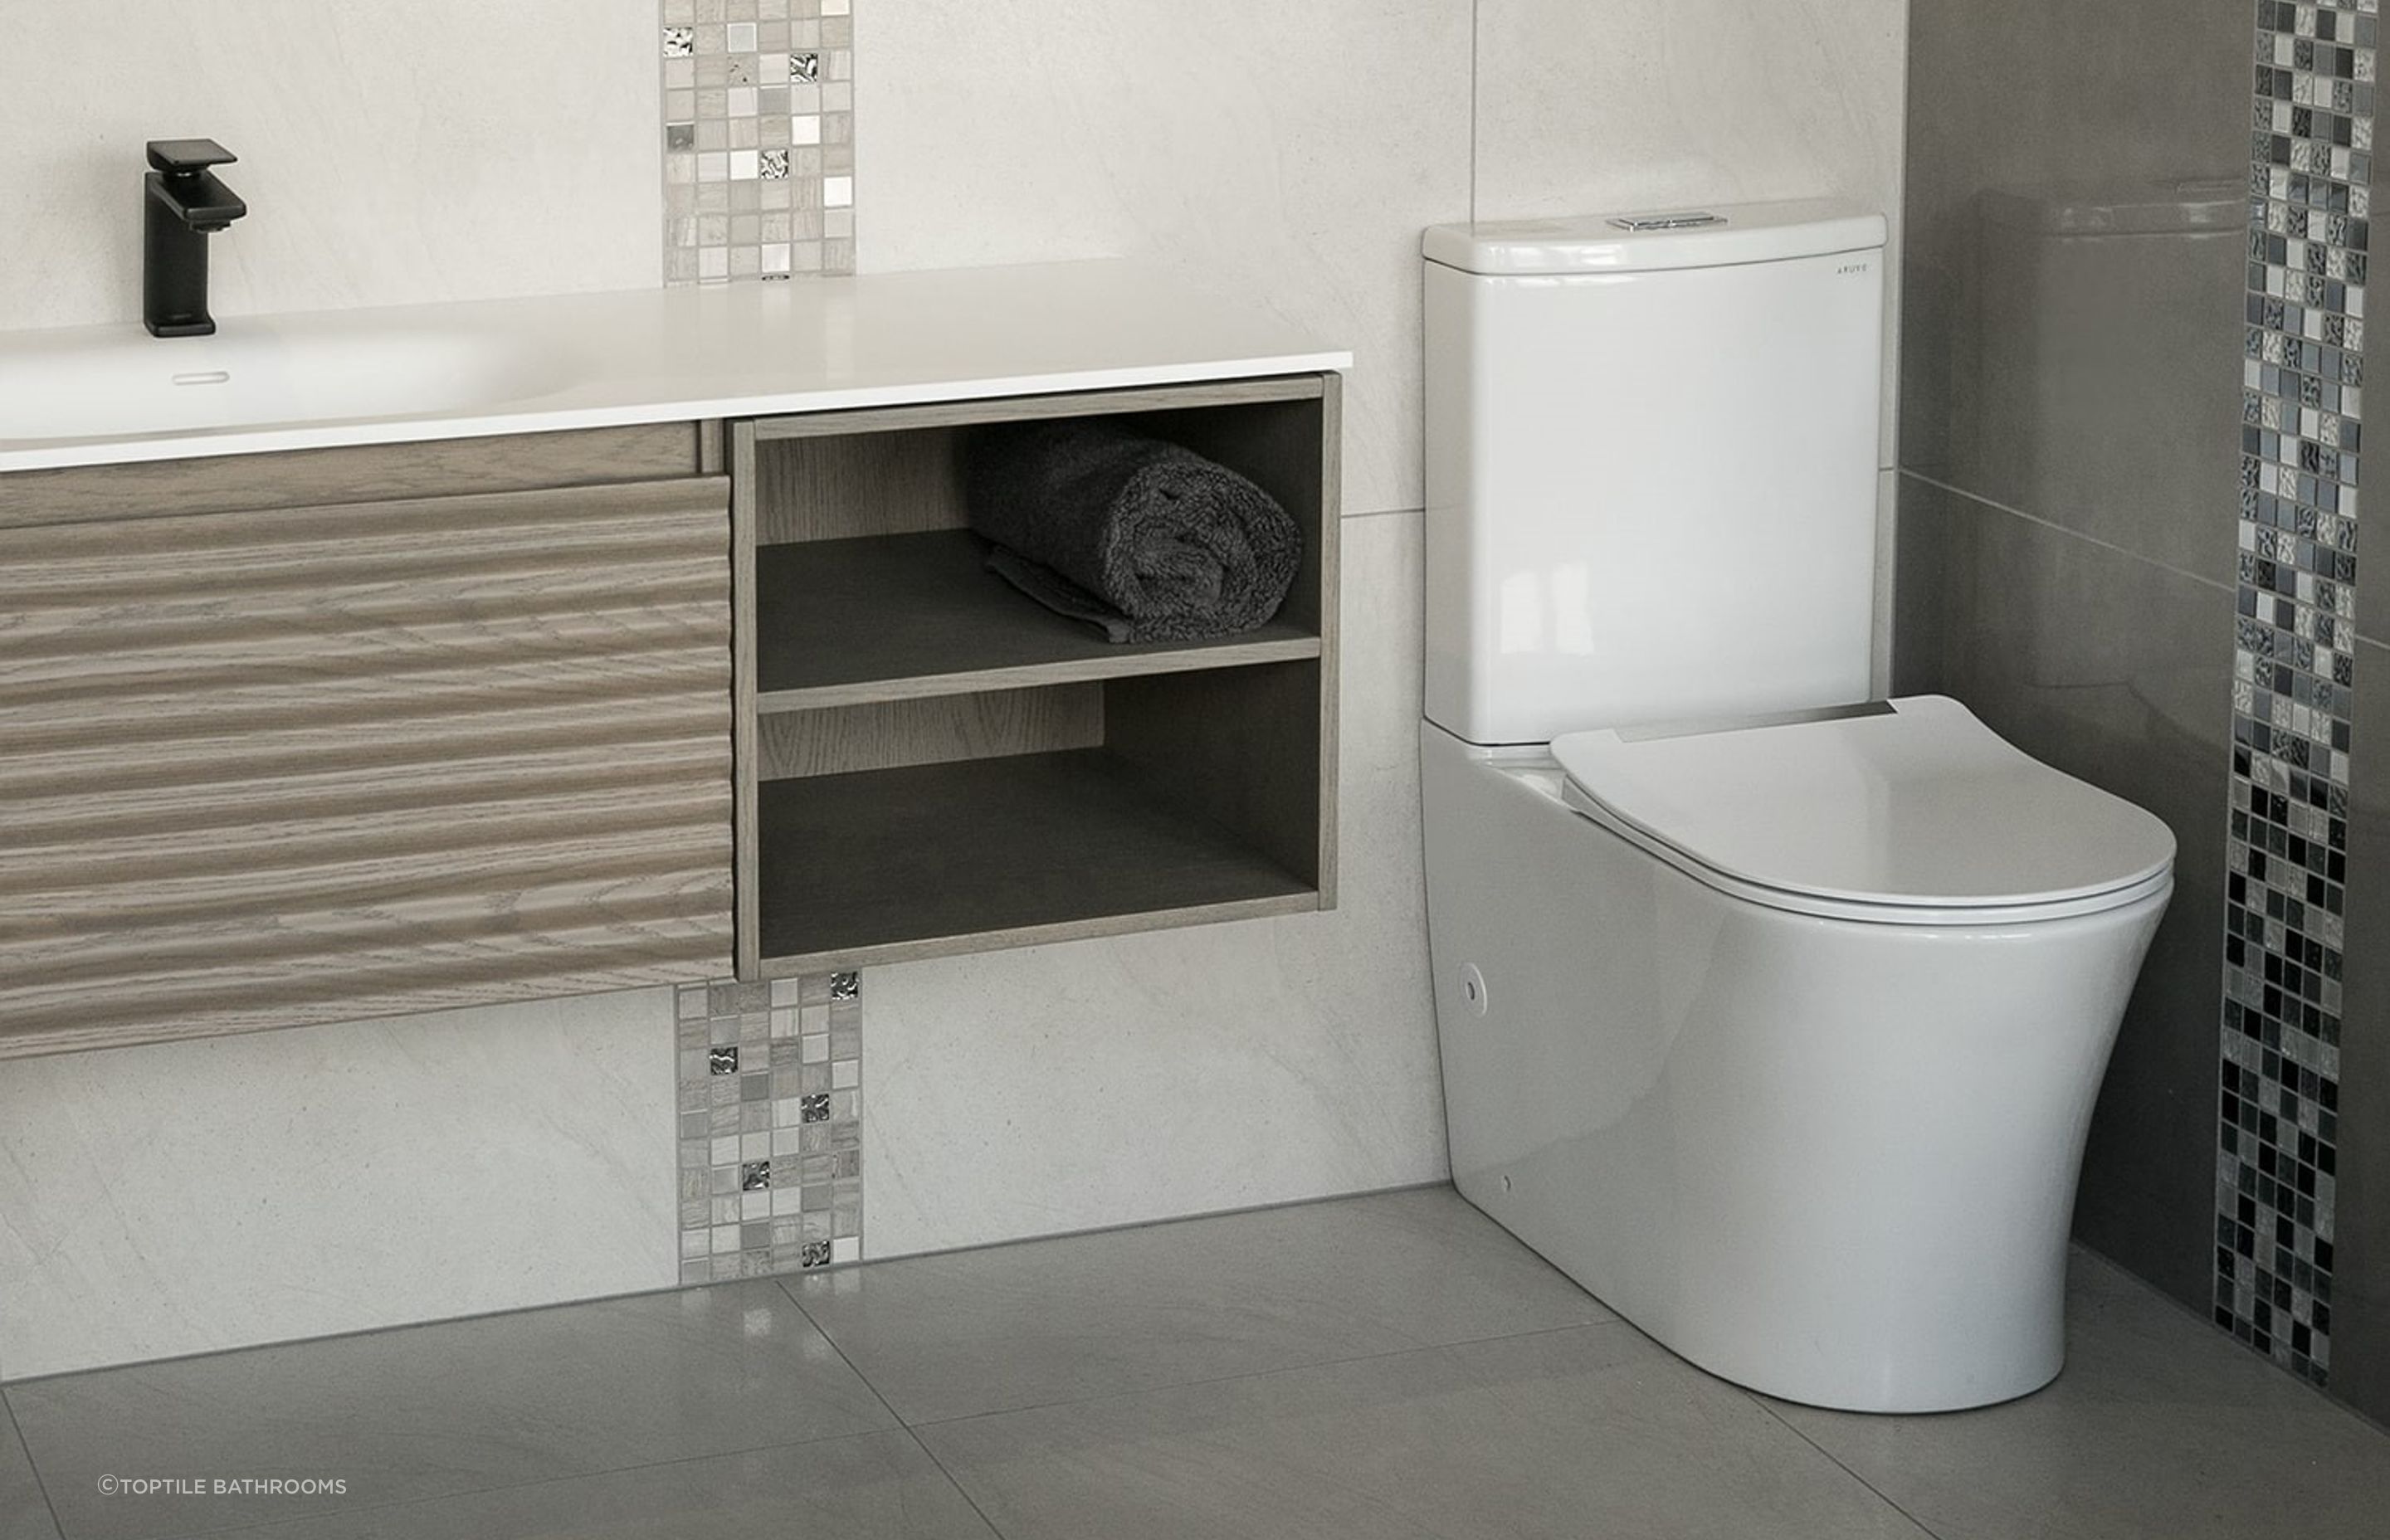 The Acovi Back To Wall Toilet Suite is a great example of a high-quality, mid-range toilet, perfectly suited for the family home.